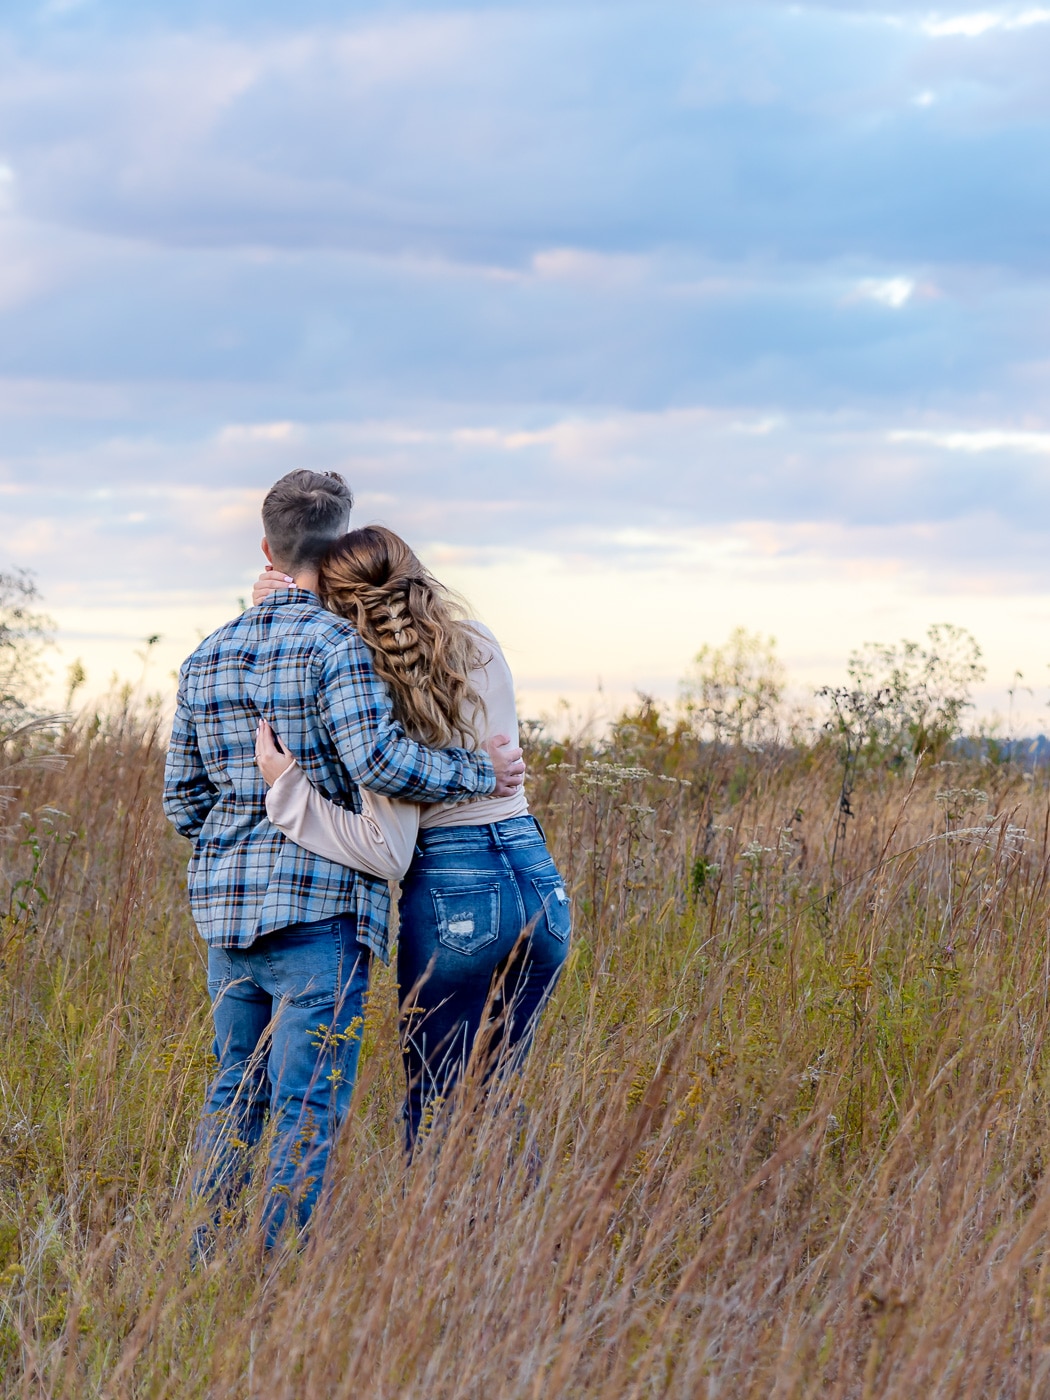 Kaitlyn and Logan sharing a tender moment amidst Charleston's golden fields during their engagement photo session.